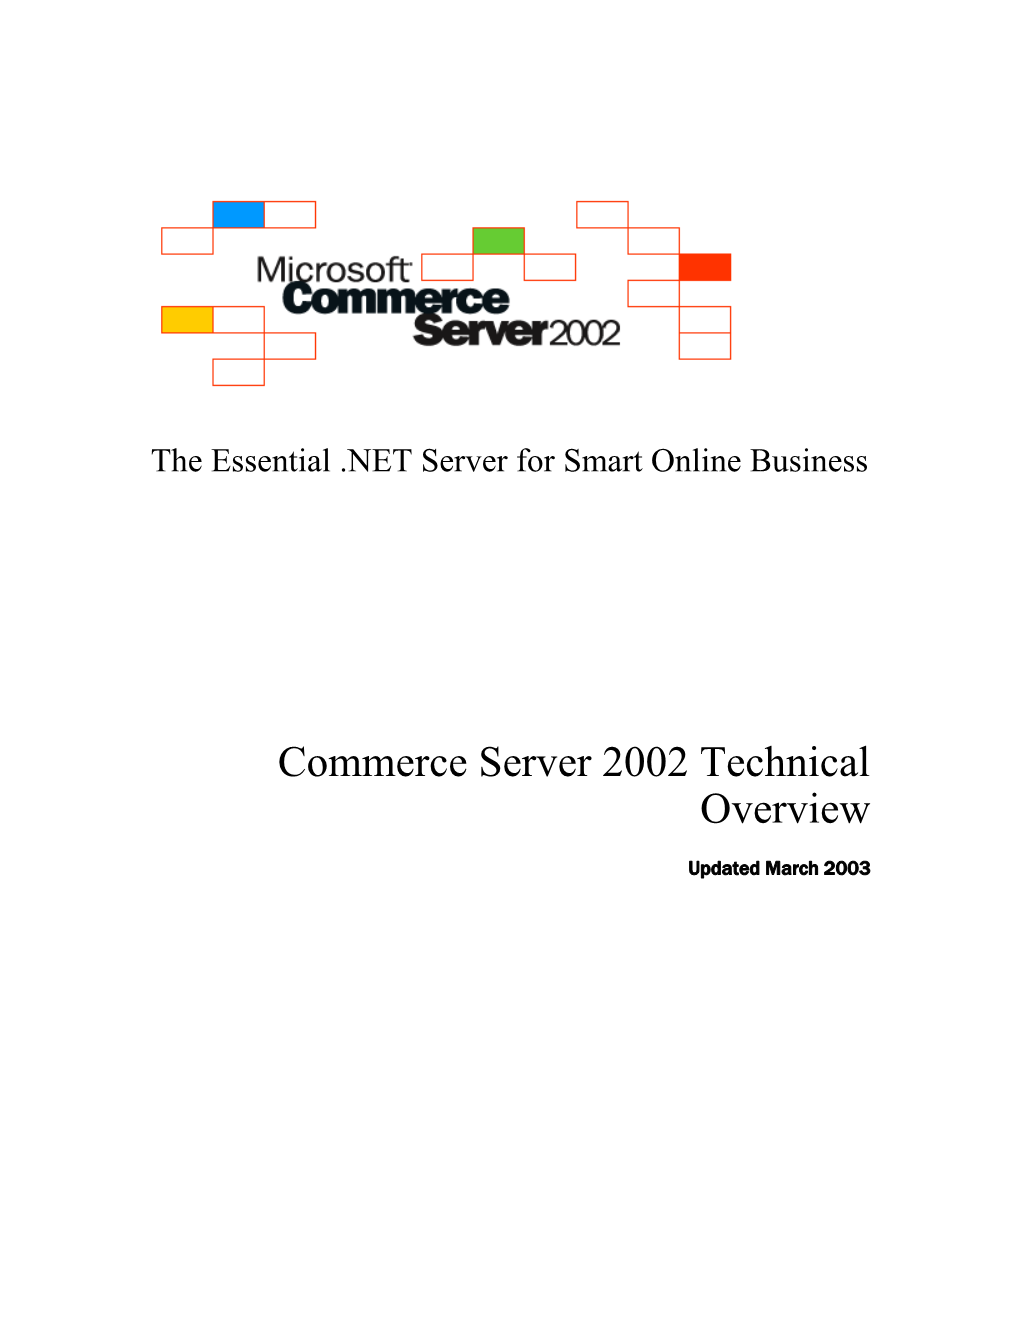 Commerce Server 2002 Technical Overview